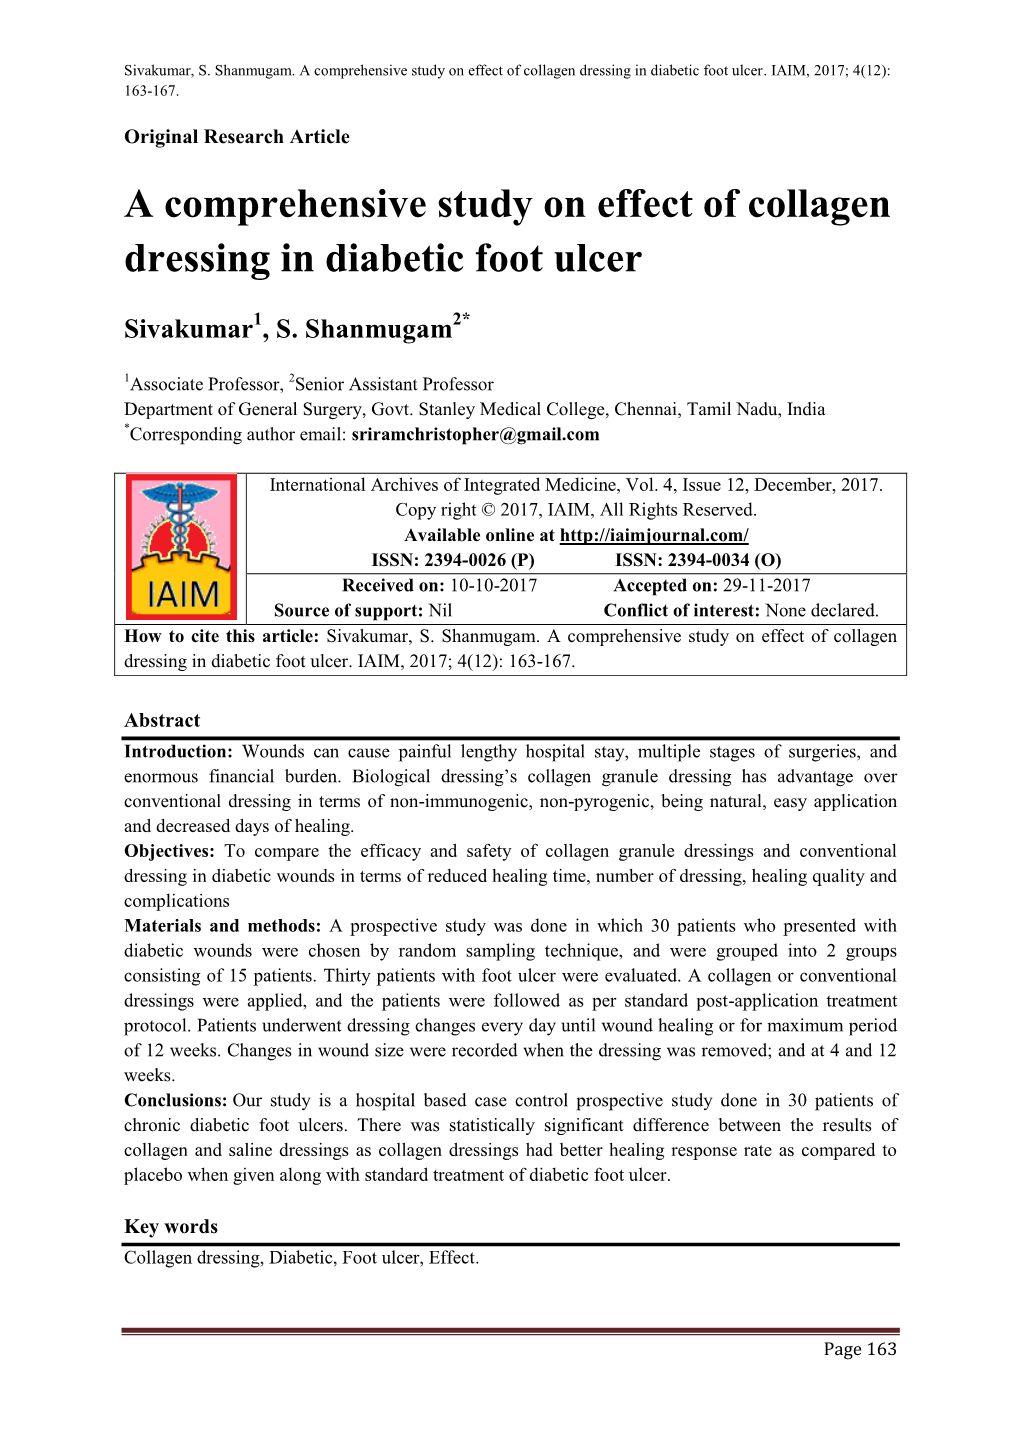 A Comprehensive Study on Effect of Collagen Dressing in Diabetic Foot Ulcer